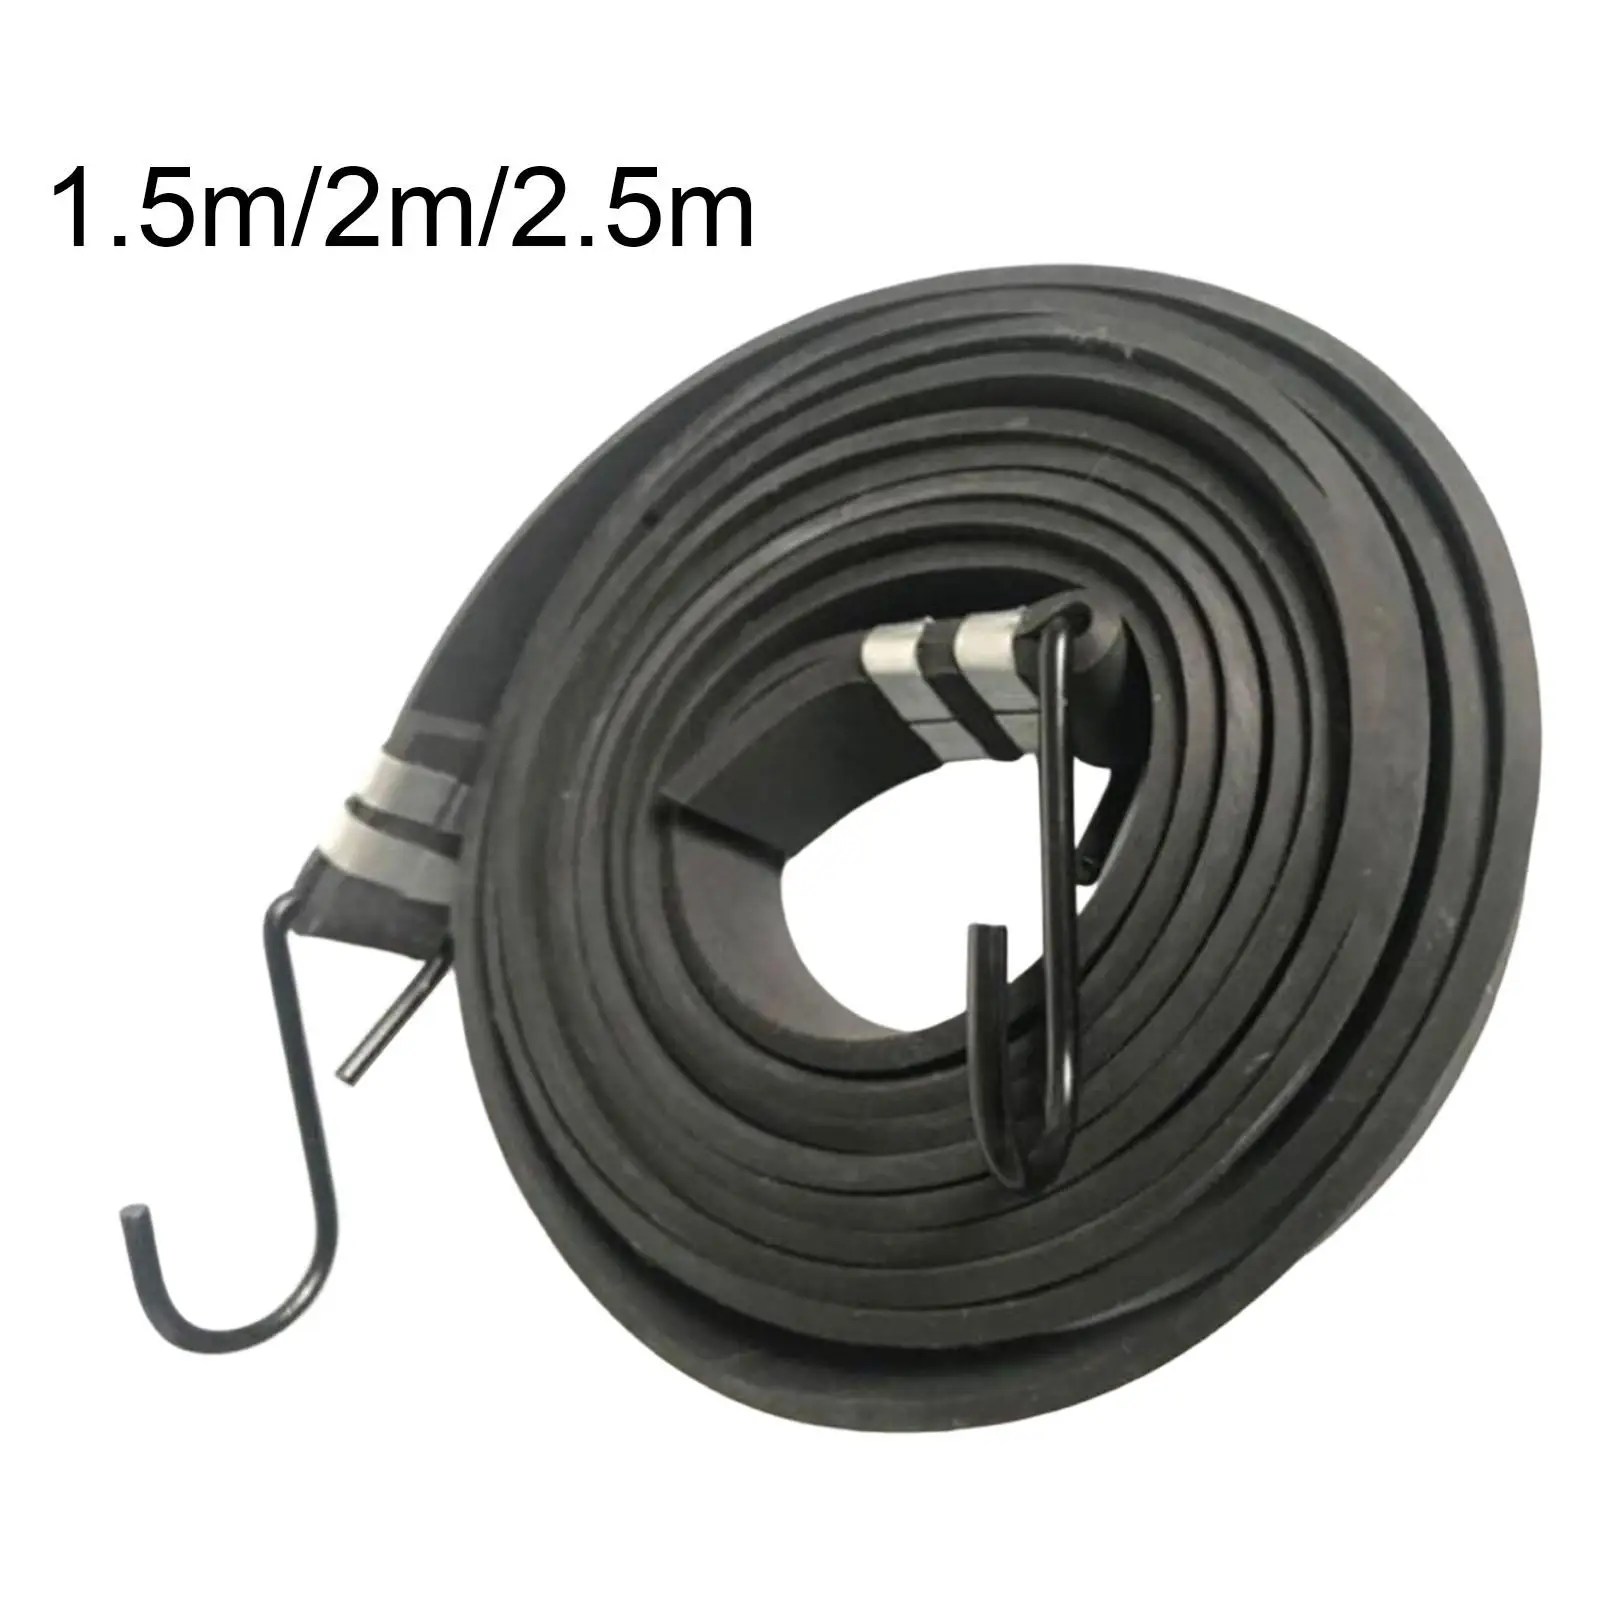 Thick Widened Flat Rubber Strap Elastic Rope with Hooks Waterproof Wide Application to Fix Boats Cars Trucks Easy Use Flexible